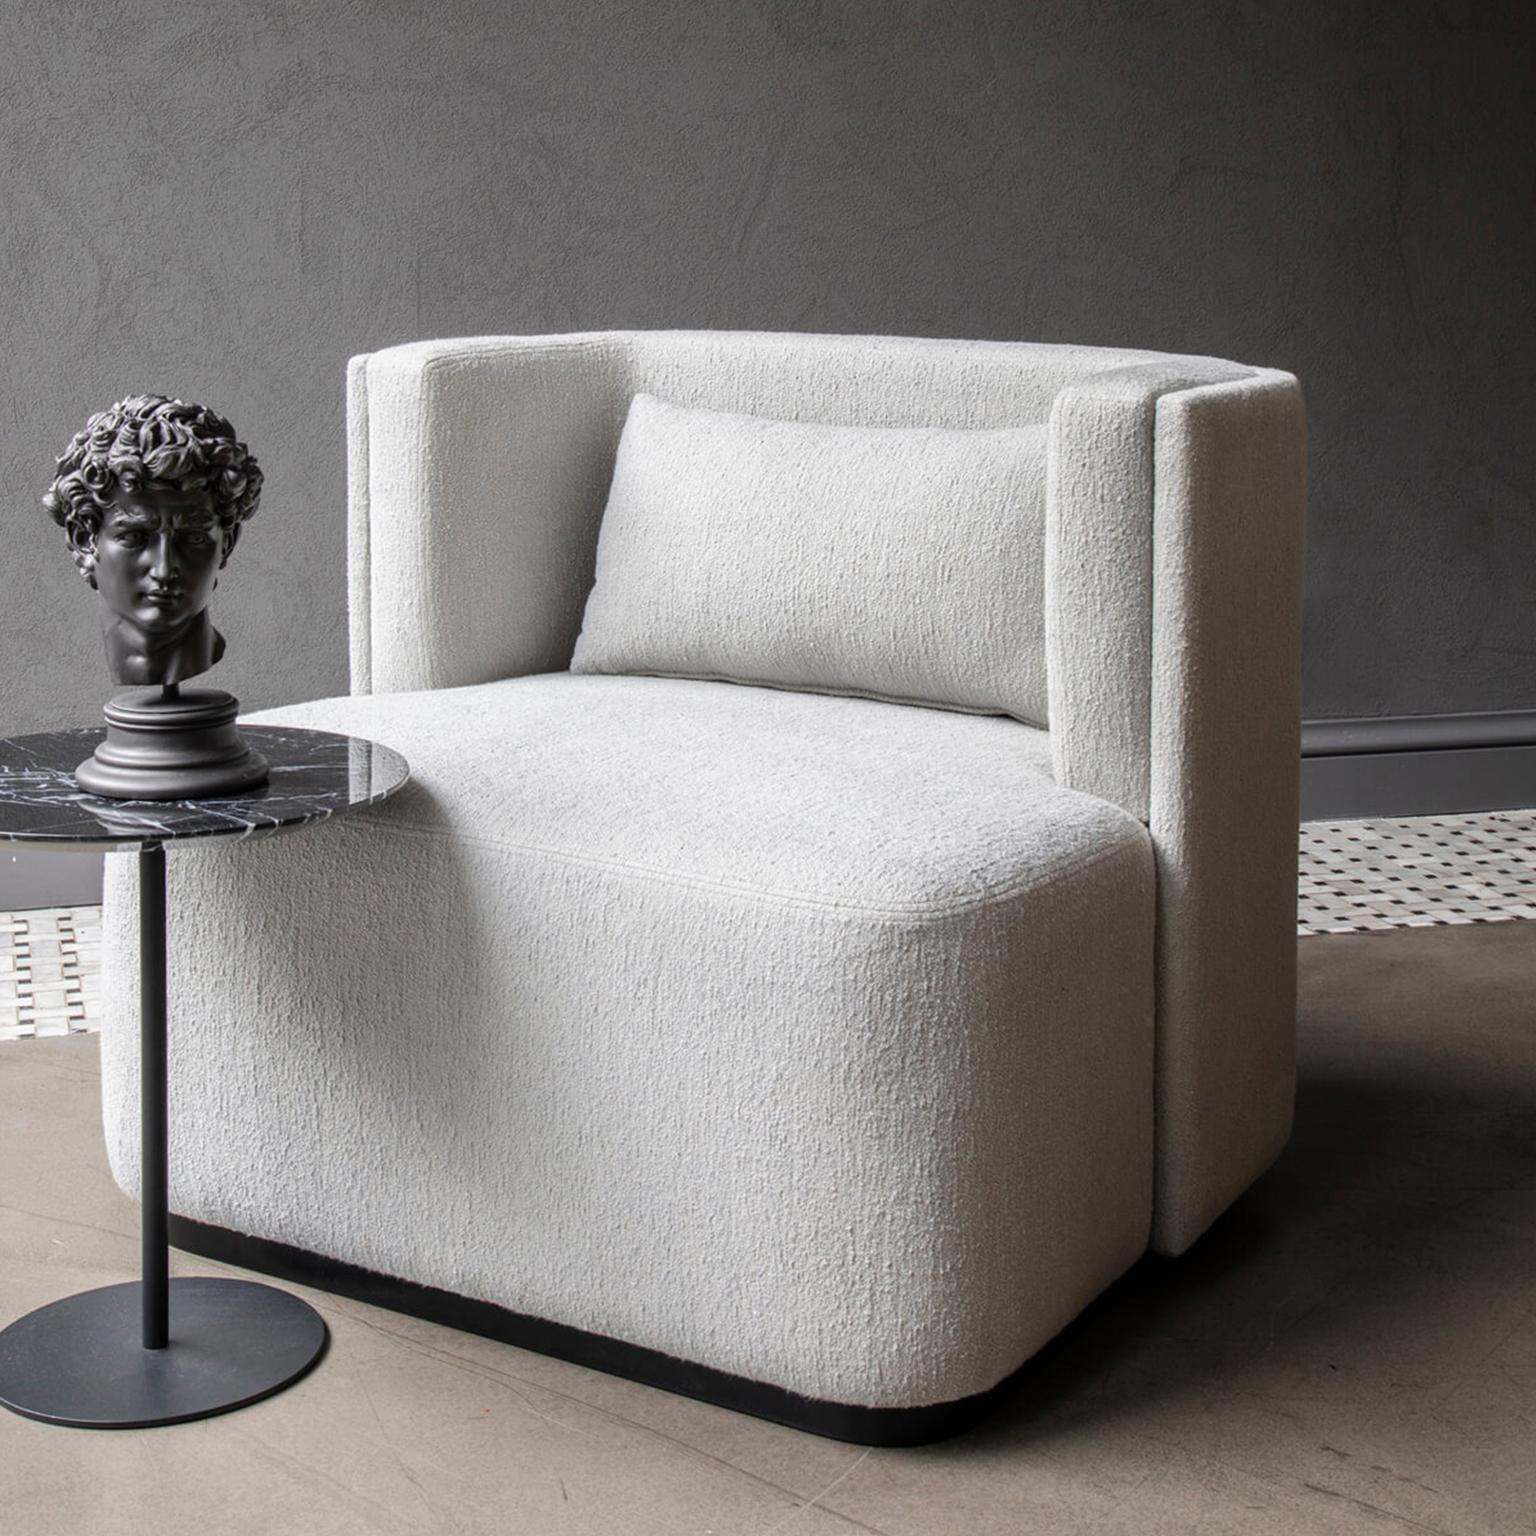 The papillonne  armchair complements your style with its flawless form and unmatched comfort, adding a unique character to your space.

**There are two armchairs in this set.

Measures: length: 31.5'' / depth: 28.4'' / height: 28.7'' / seat height: